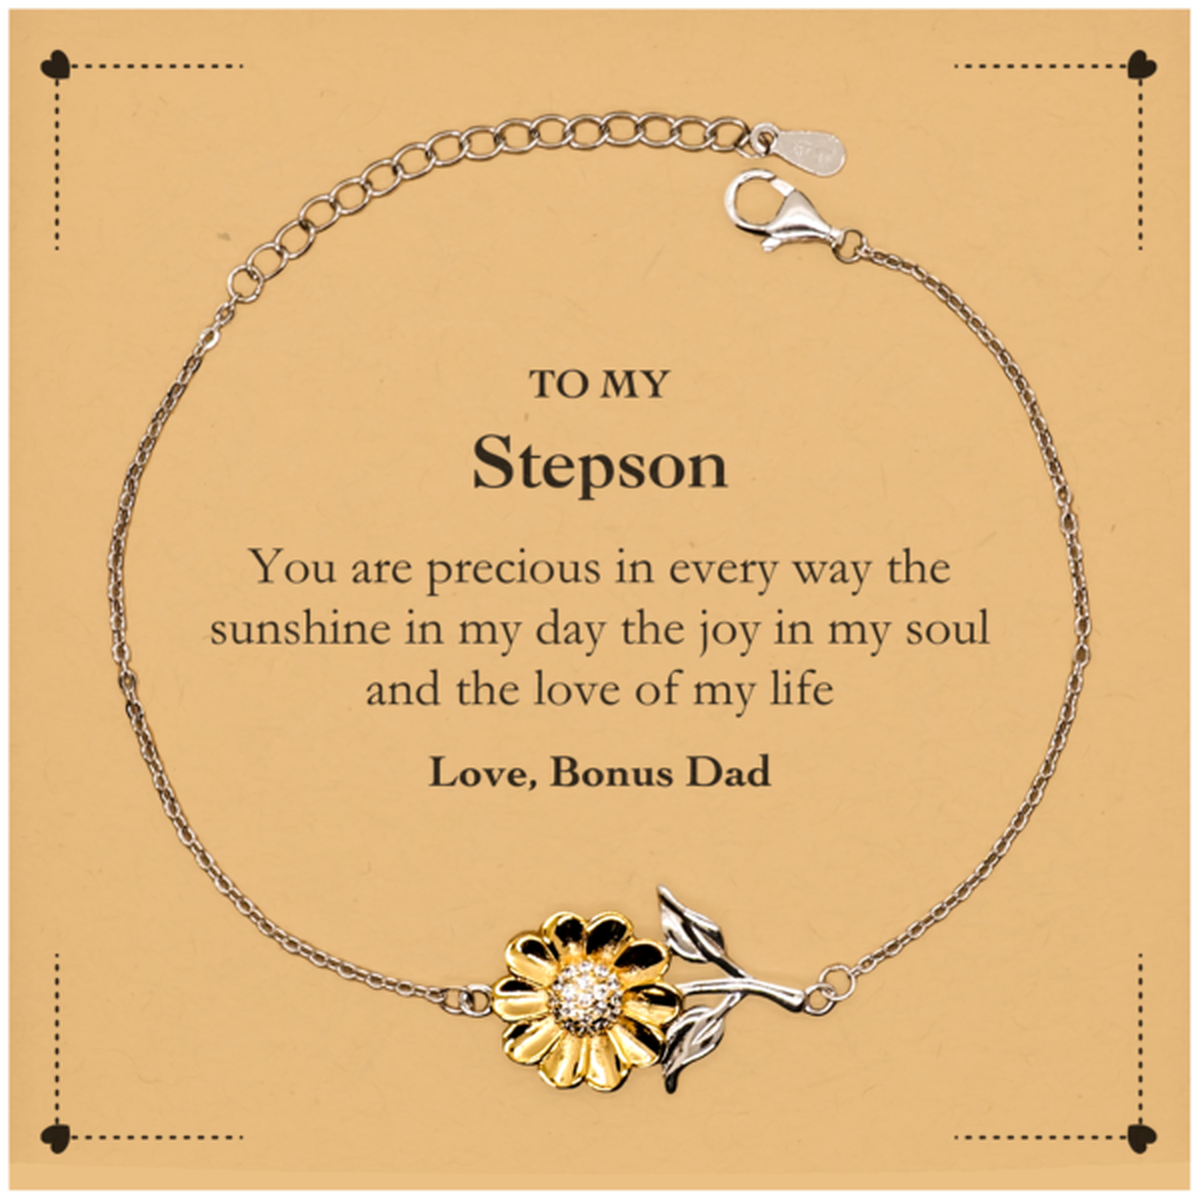 Graduation Gifts for Stepson Sunflower Bracelet Present from Bonus Dad, Christmas Stepson Birthday Gifts Stepson You are precious in every way the sunshine in my day. Love, Bonus Dad